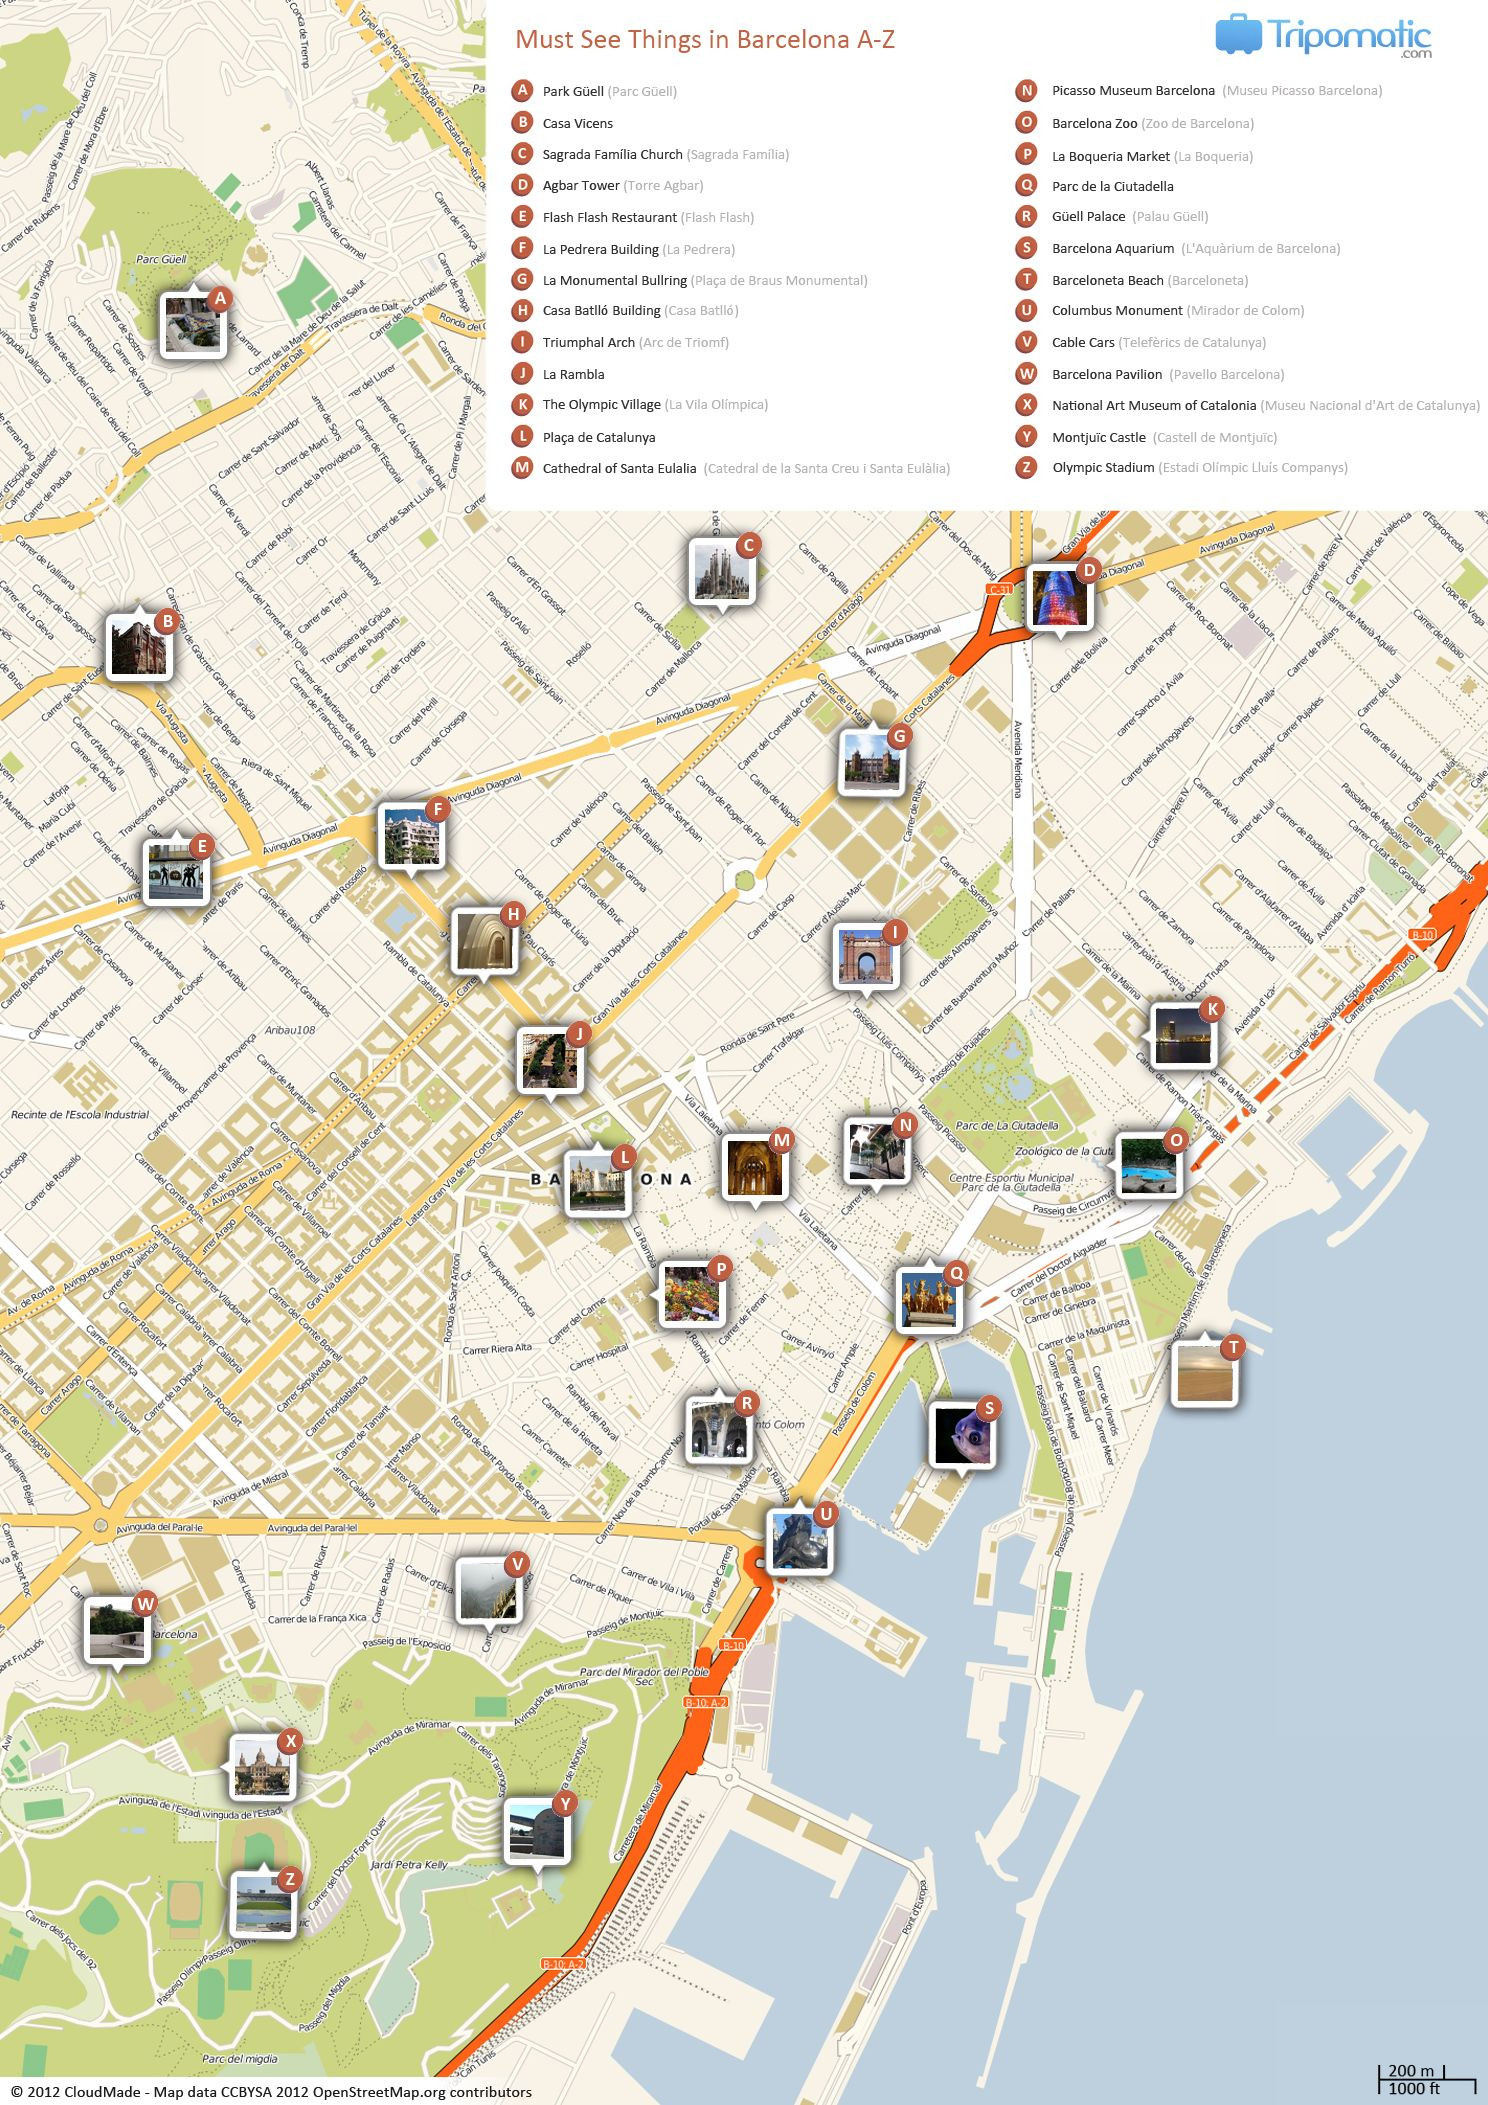 Printable Map Google Best Of What To See In Barcelona Adventures â°â¾ Pinterest